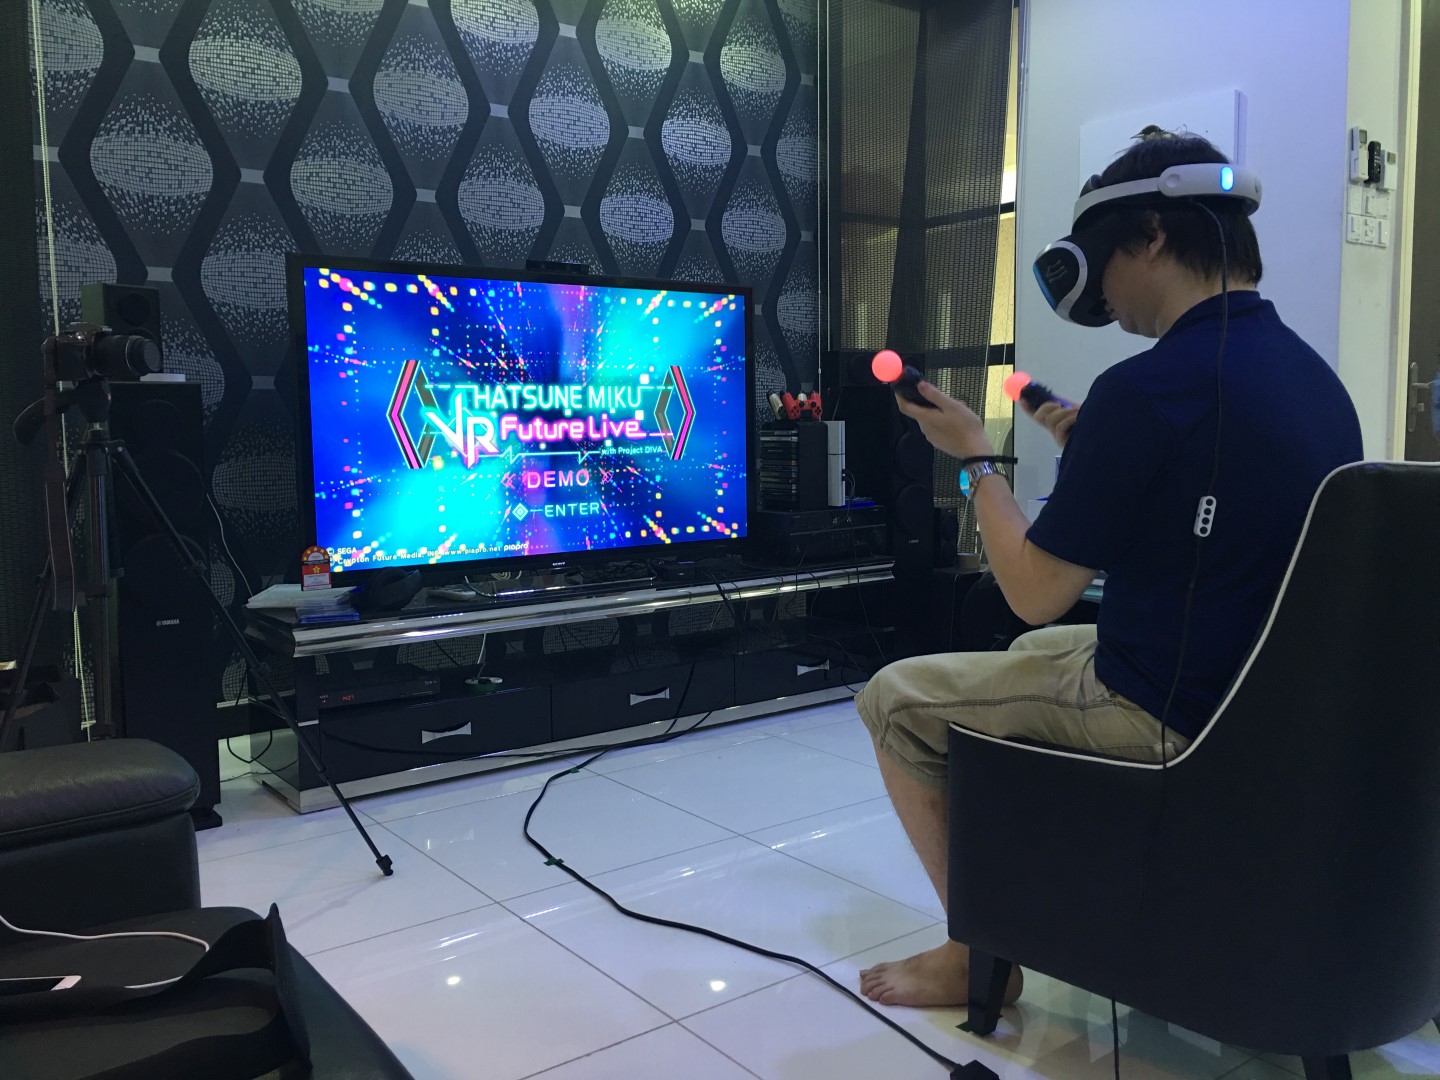 Our Overwatch Captain Nkydoomer testing out his beloved Hatsune Miku Future Live Demo! 